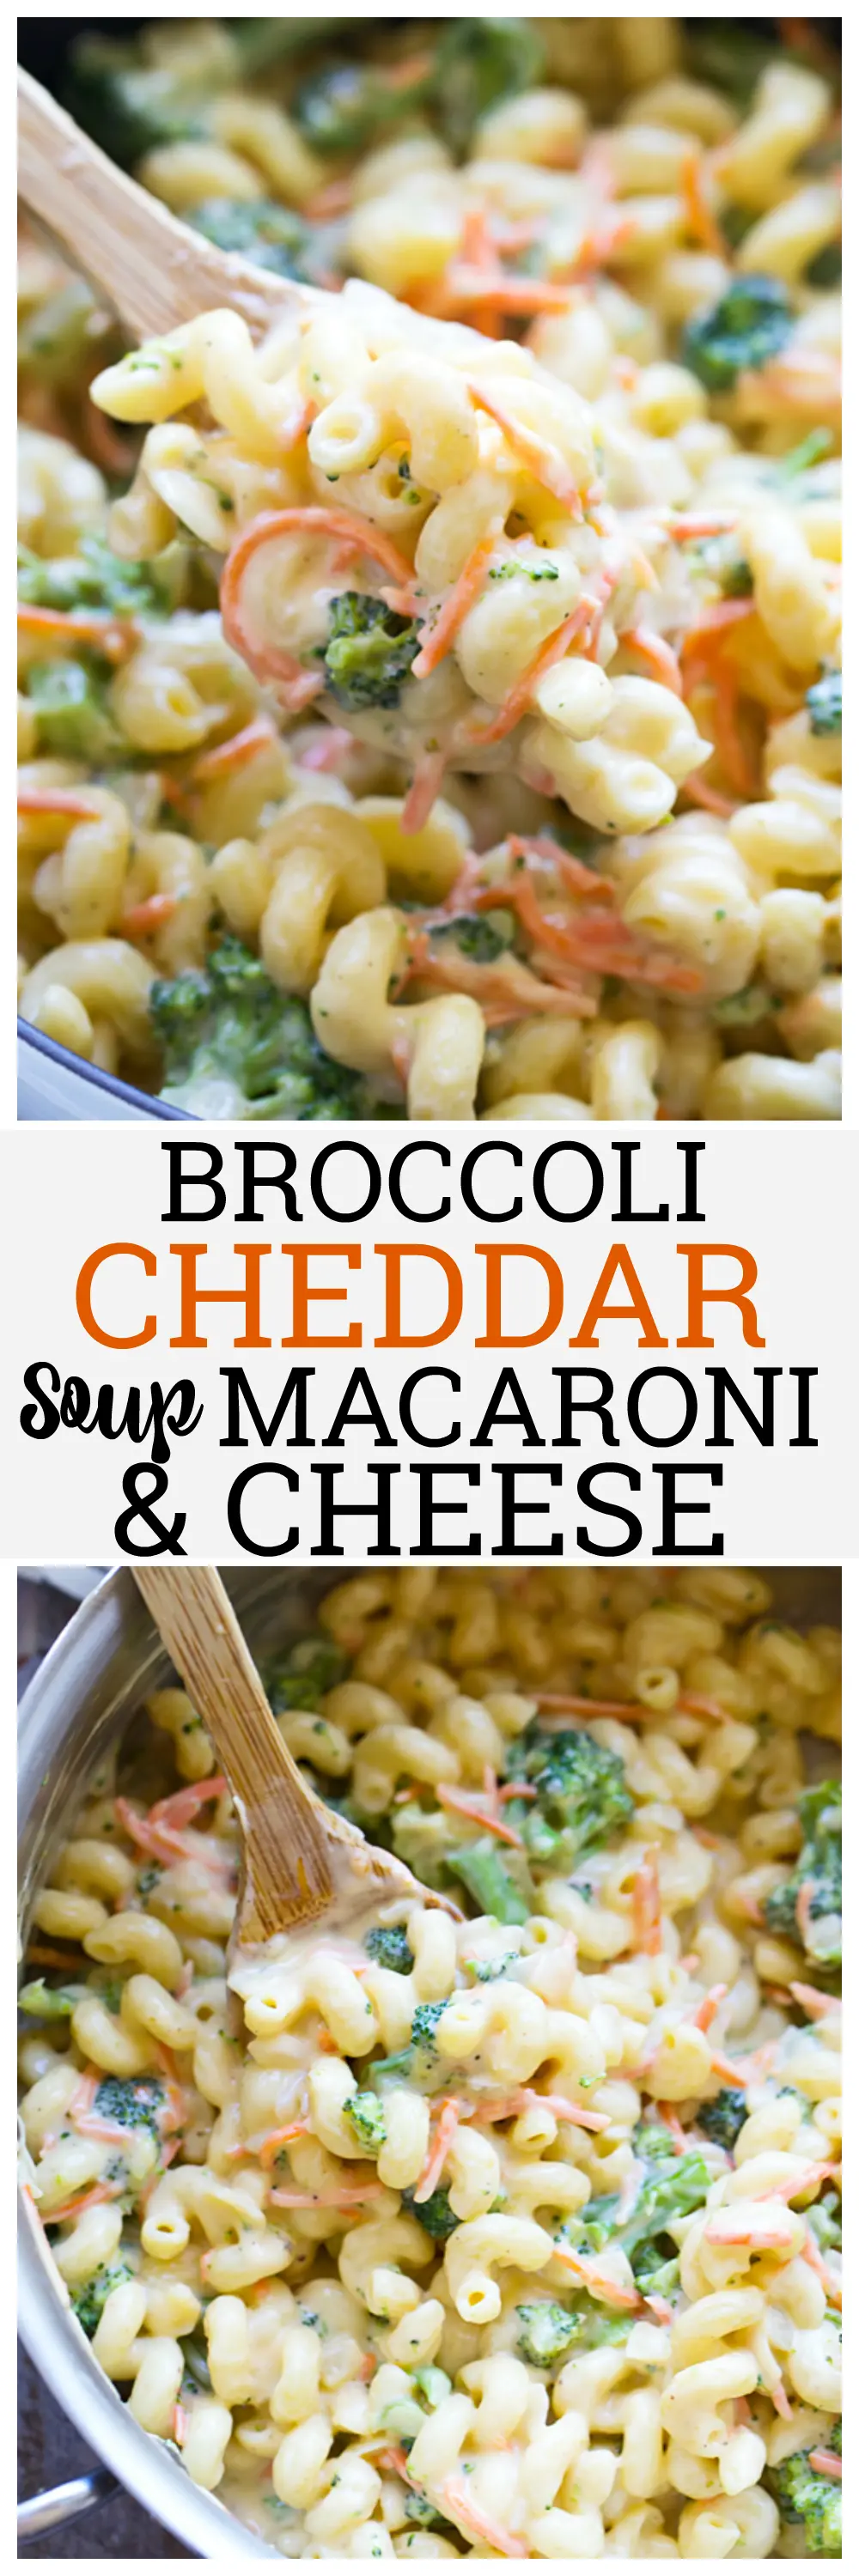 Broccoli Cheddar Soup Mac and Cheese - Your favorite cheesy broccoli soup in mac and cheese form!